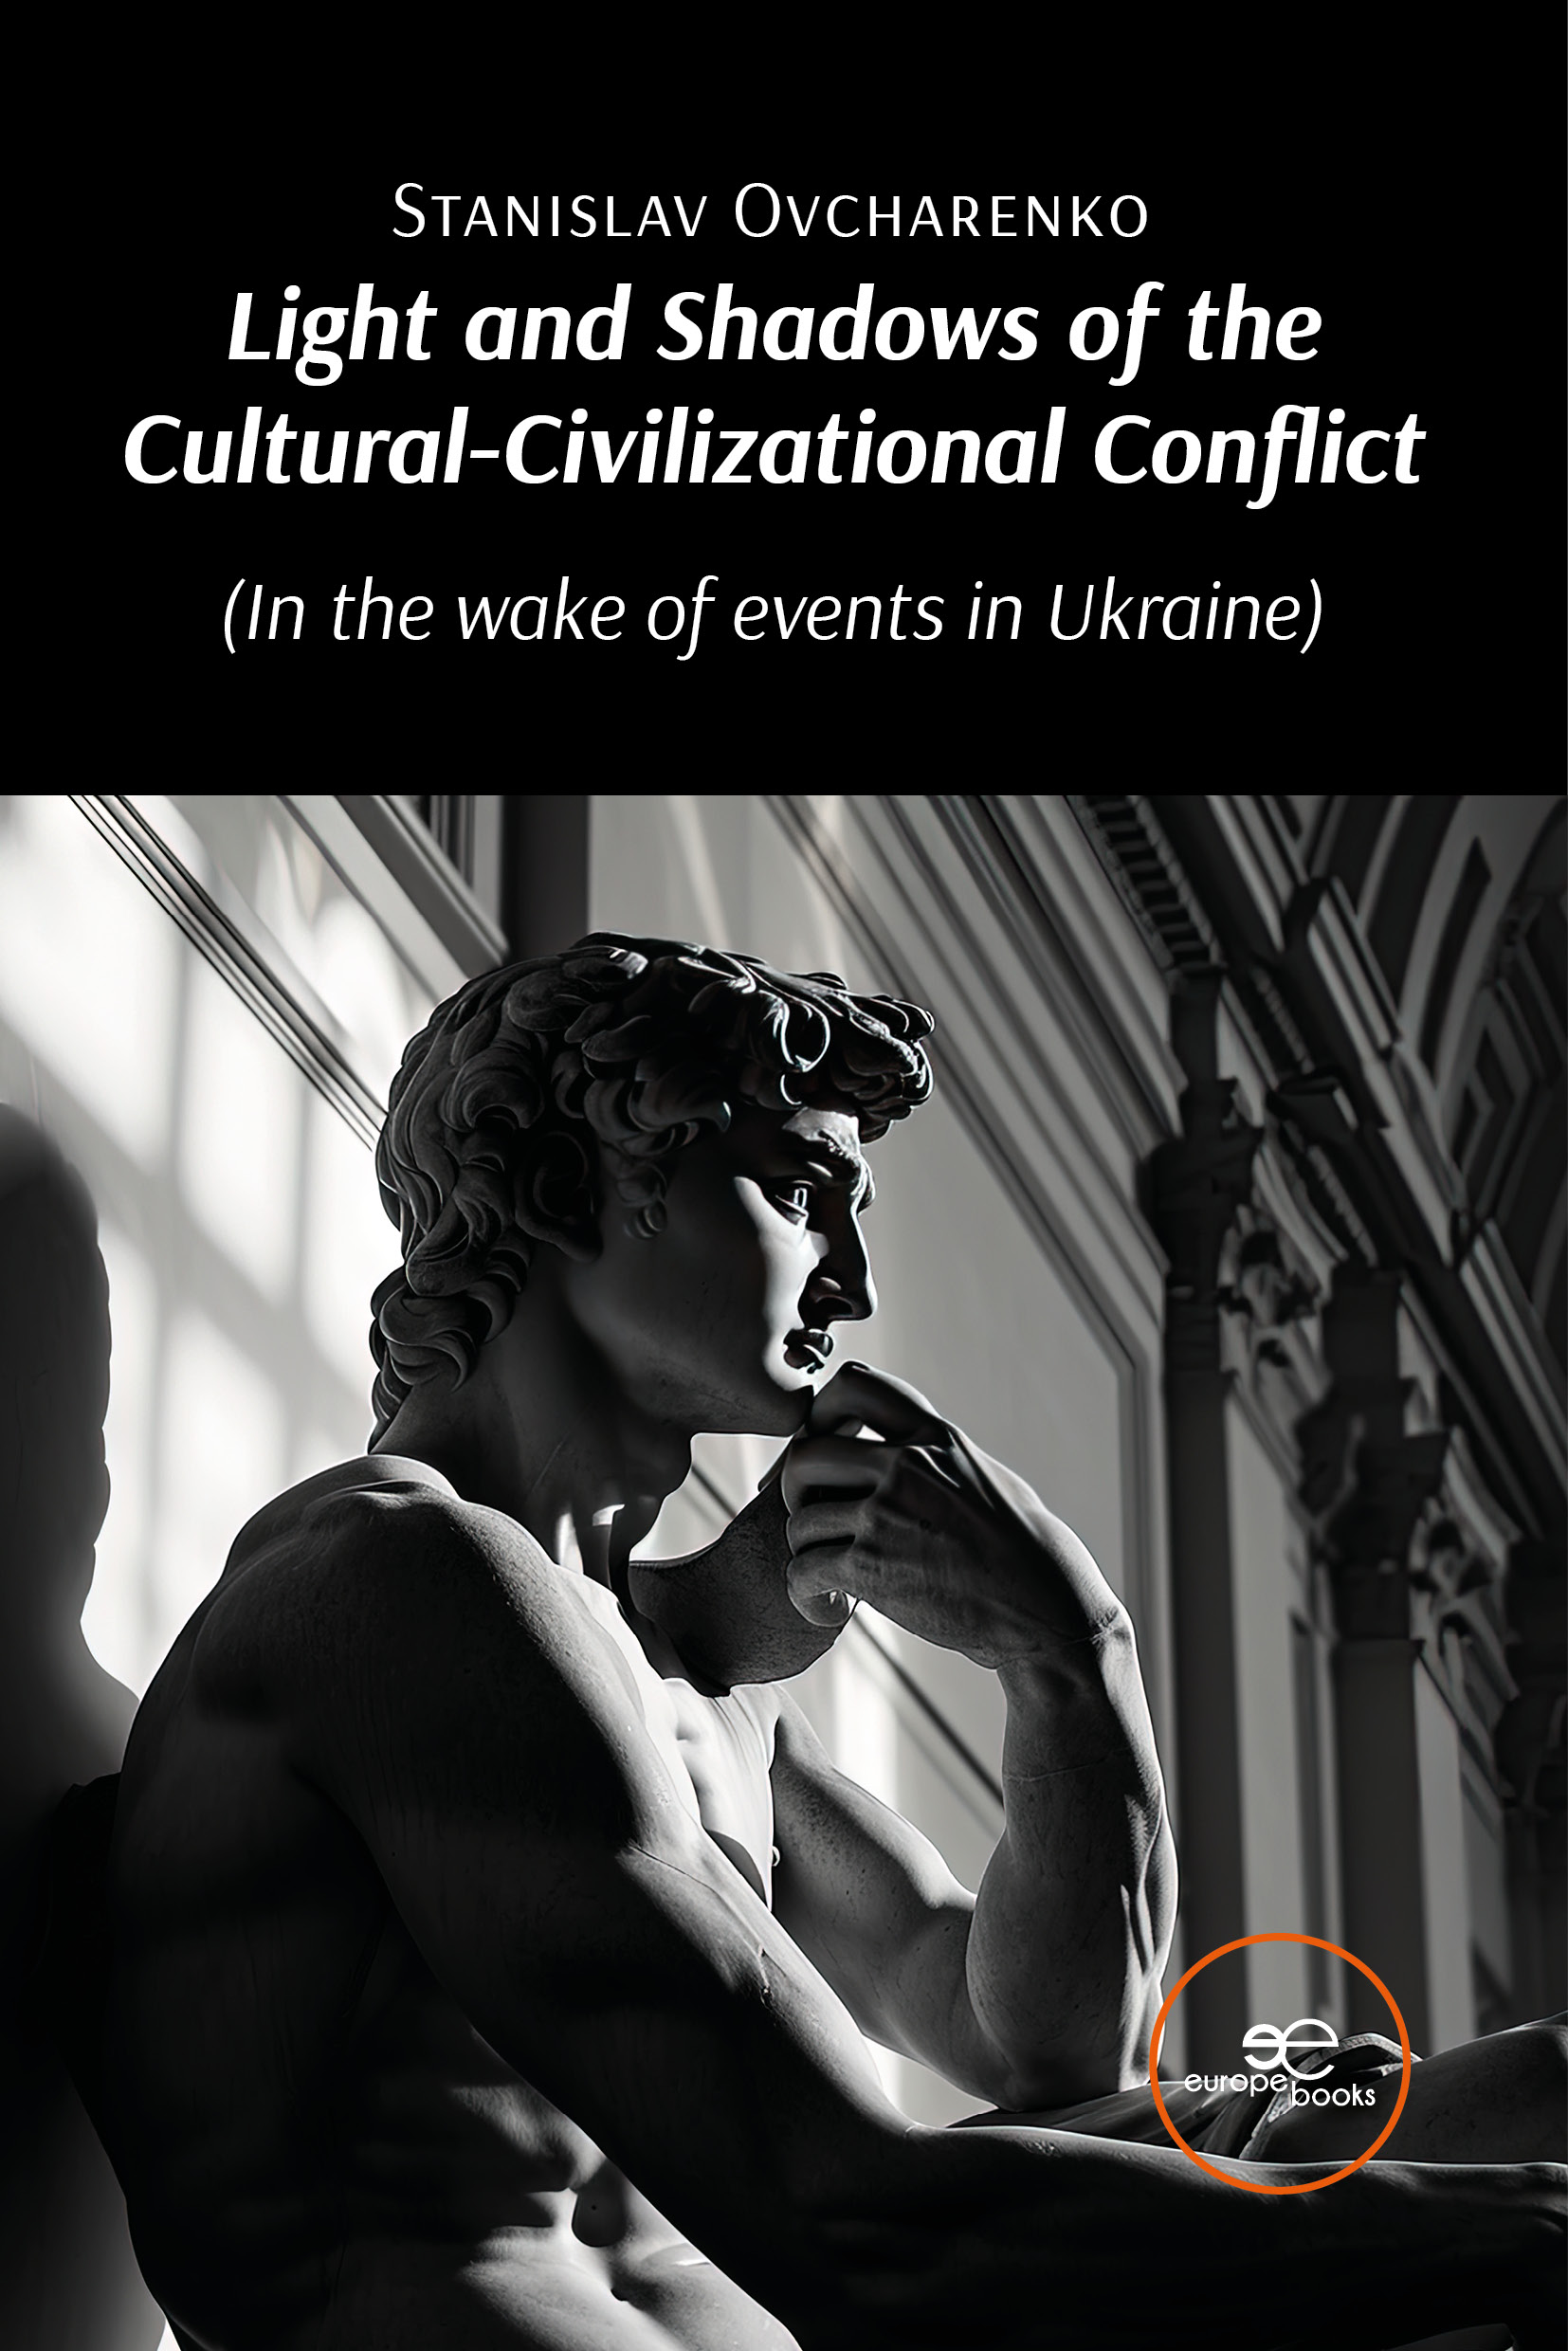 LIGHT AND SHADOWS OF THE CULTURAL-CIVILIZATIONAL CONFLICT – Stanislav Ovcharenko